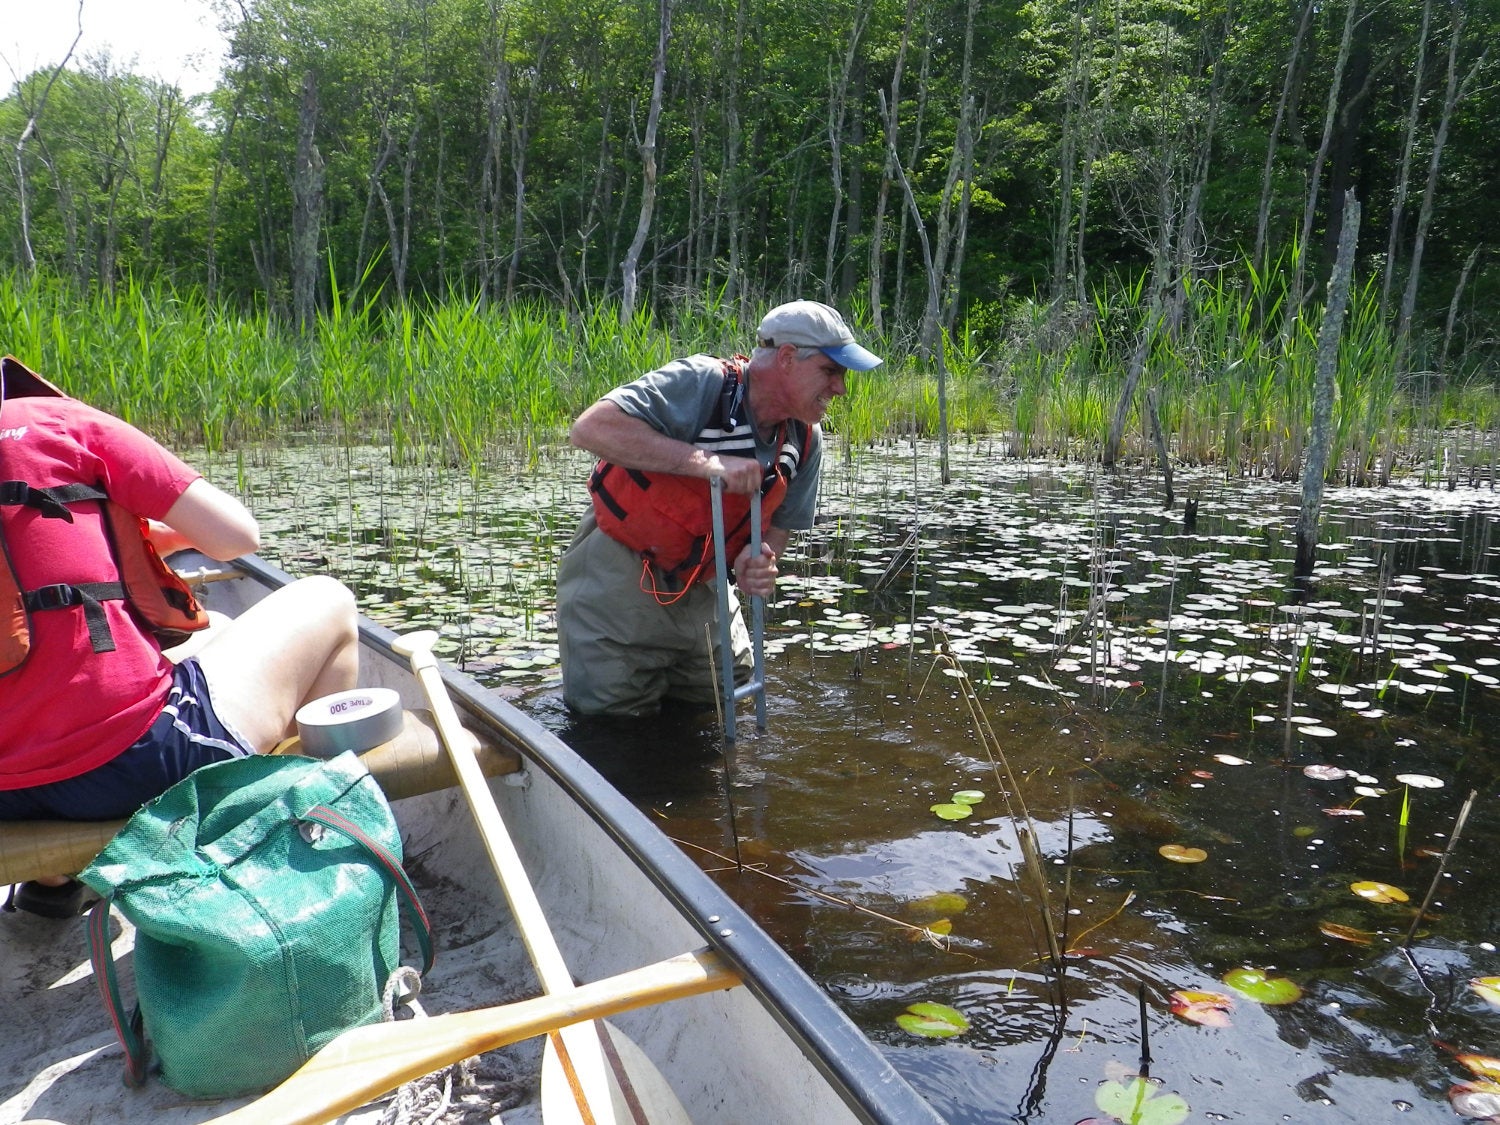 Water quality researcher in a pond next to a canoe